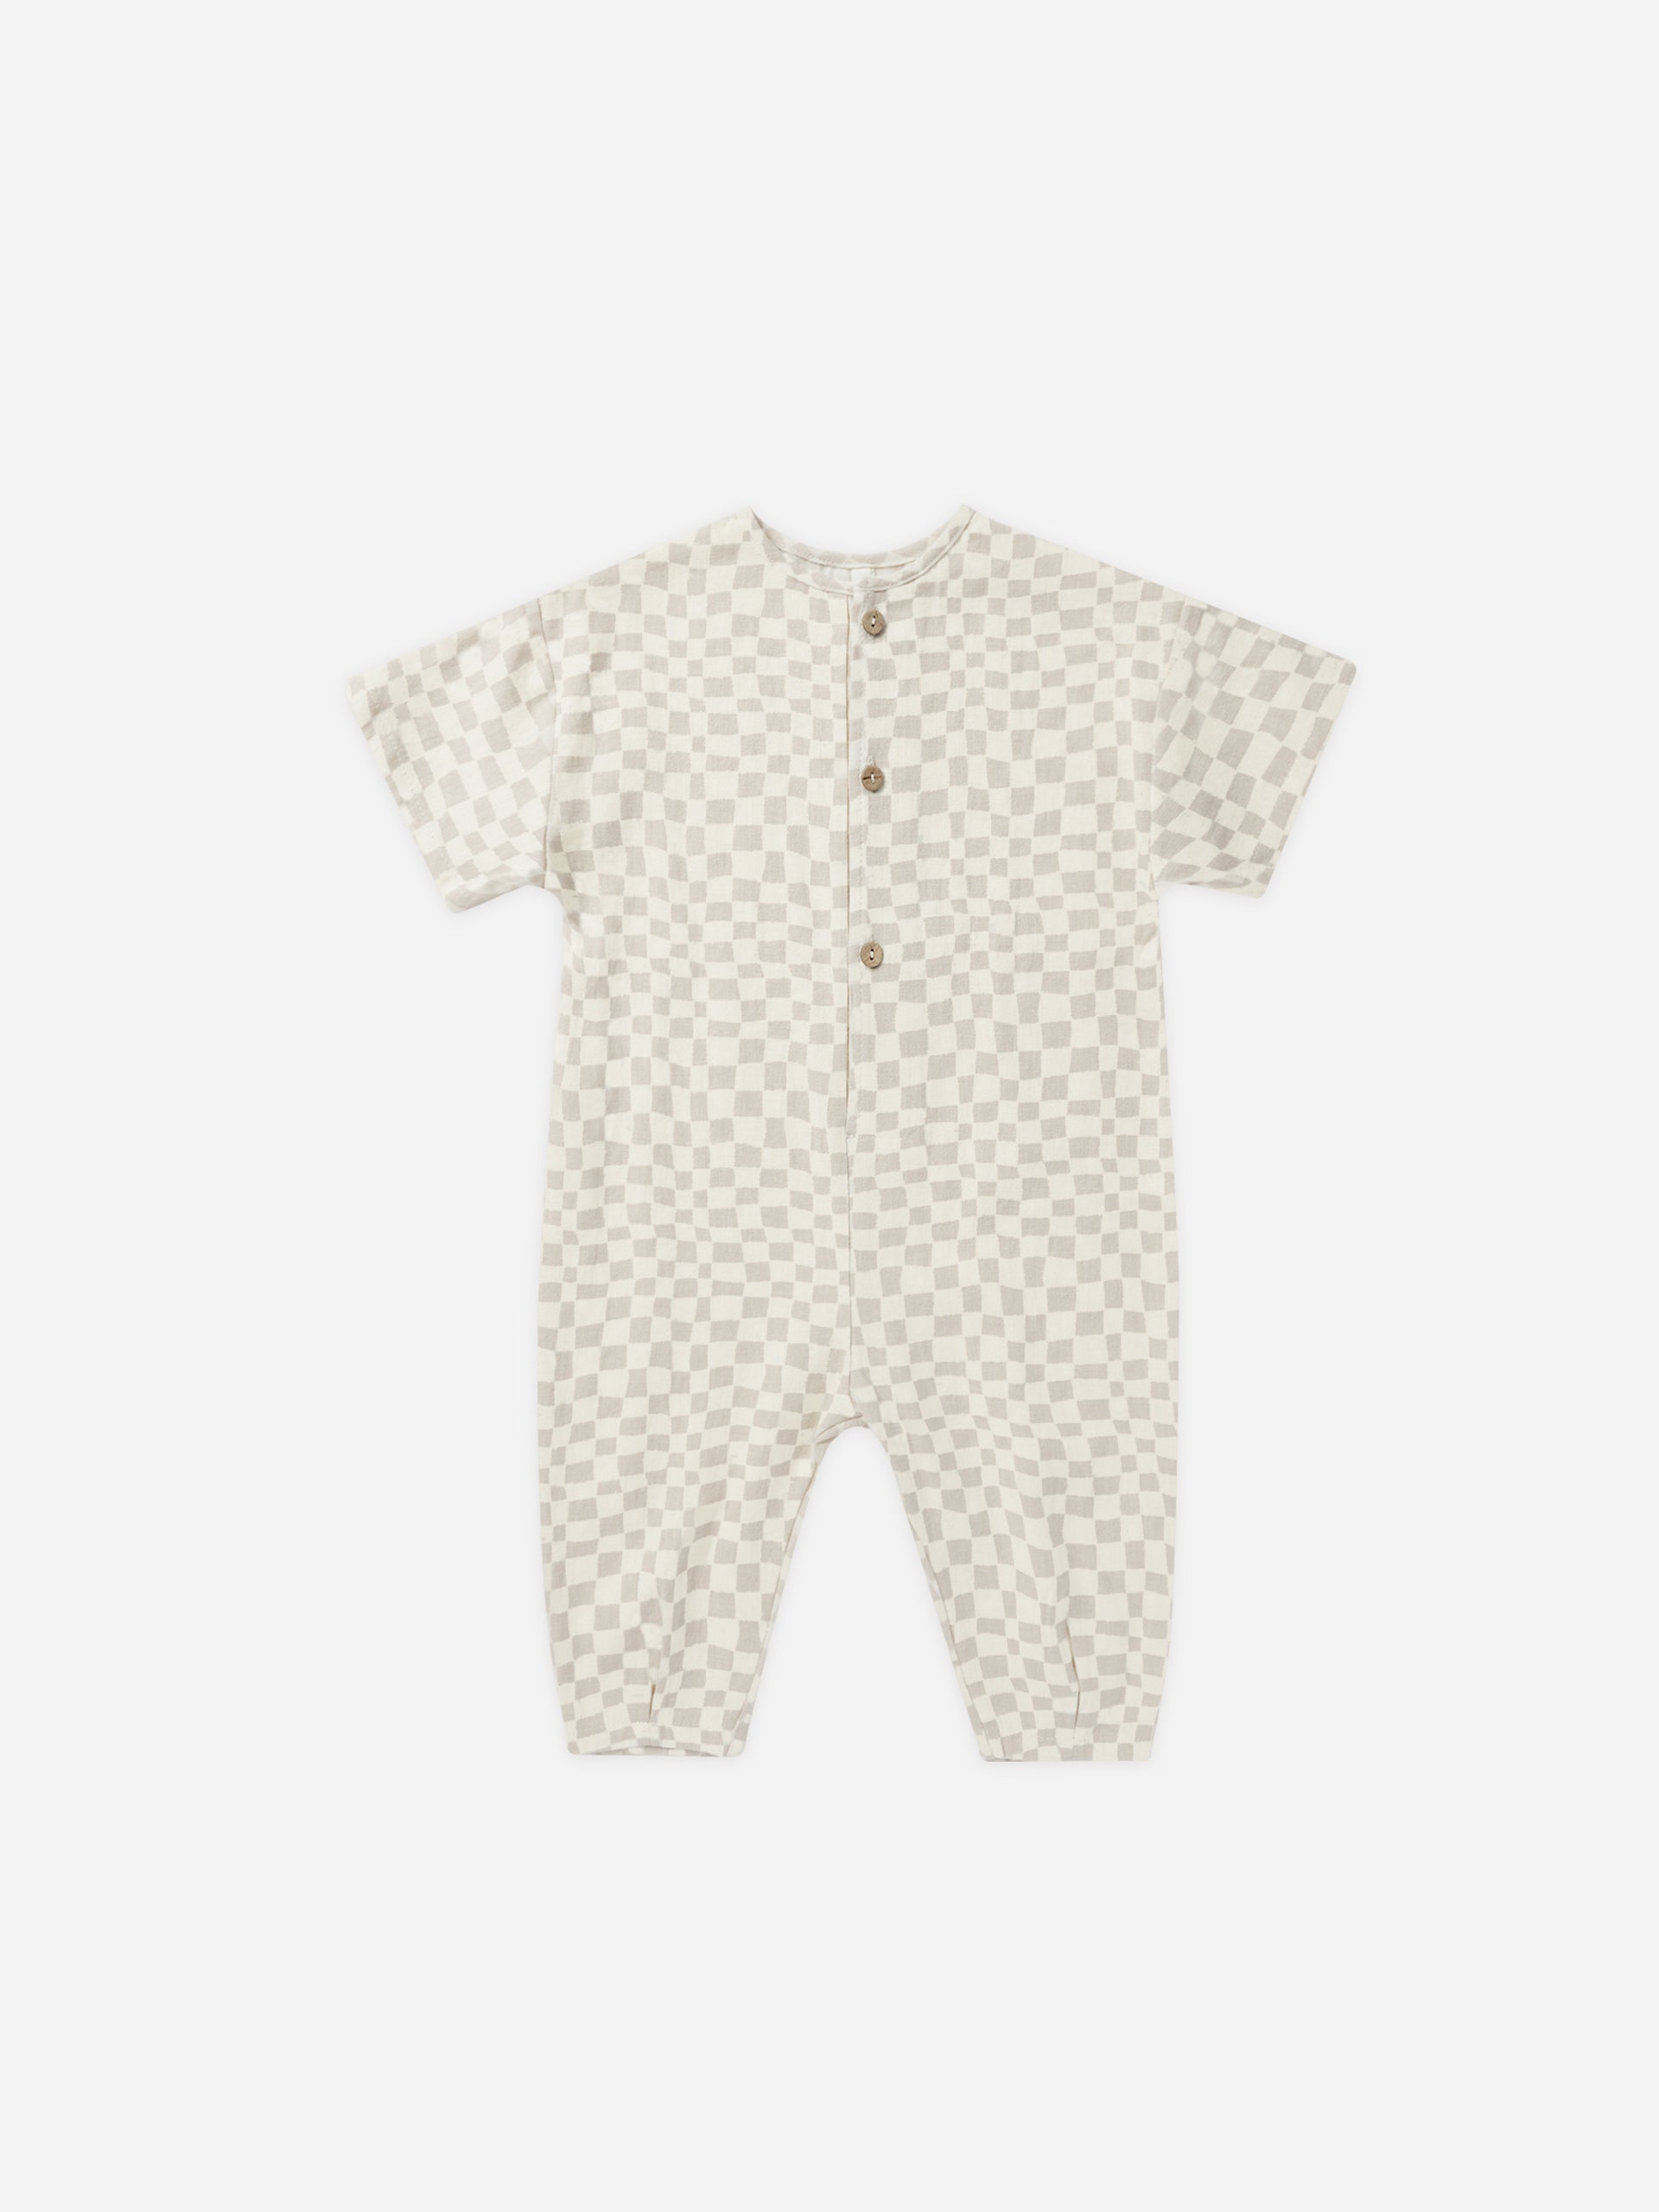 Hayes Jumpsuit || Dove Check - Rylee + Cru | Kids Clothes | Trendy Baby Clothes | Modern Infant Outfits |